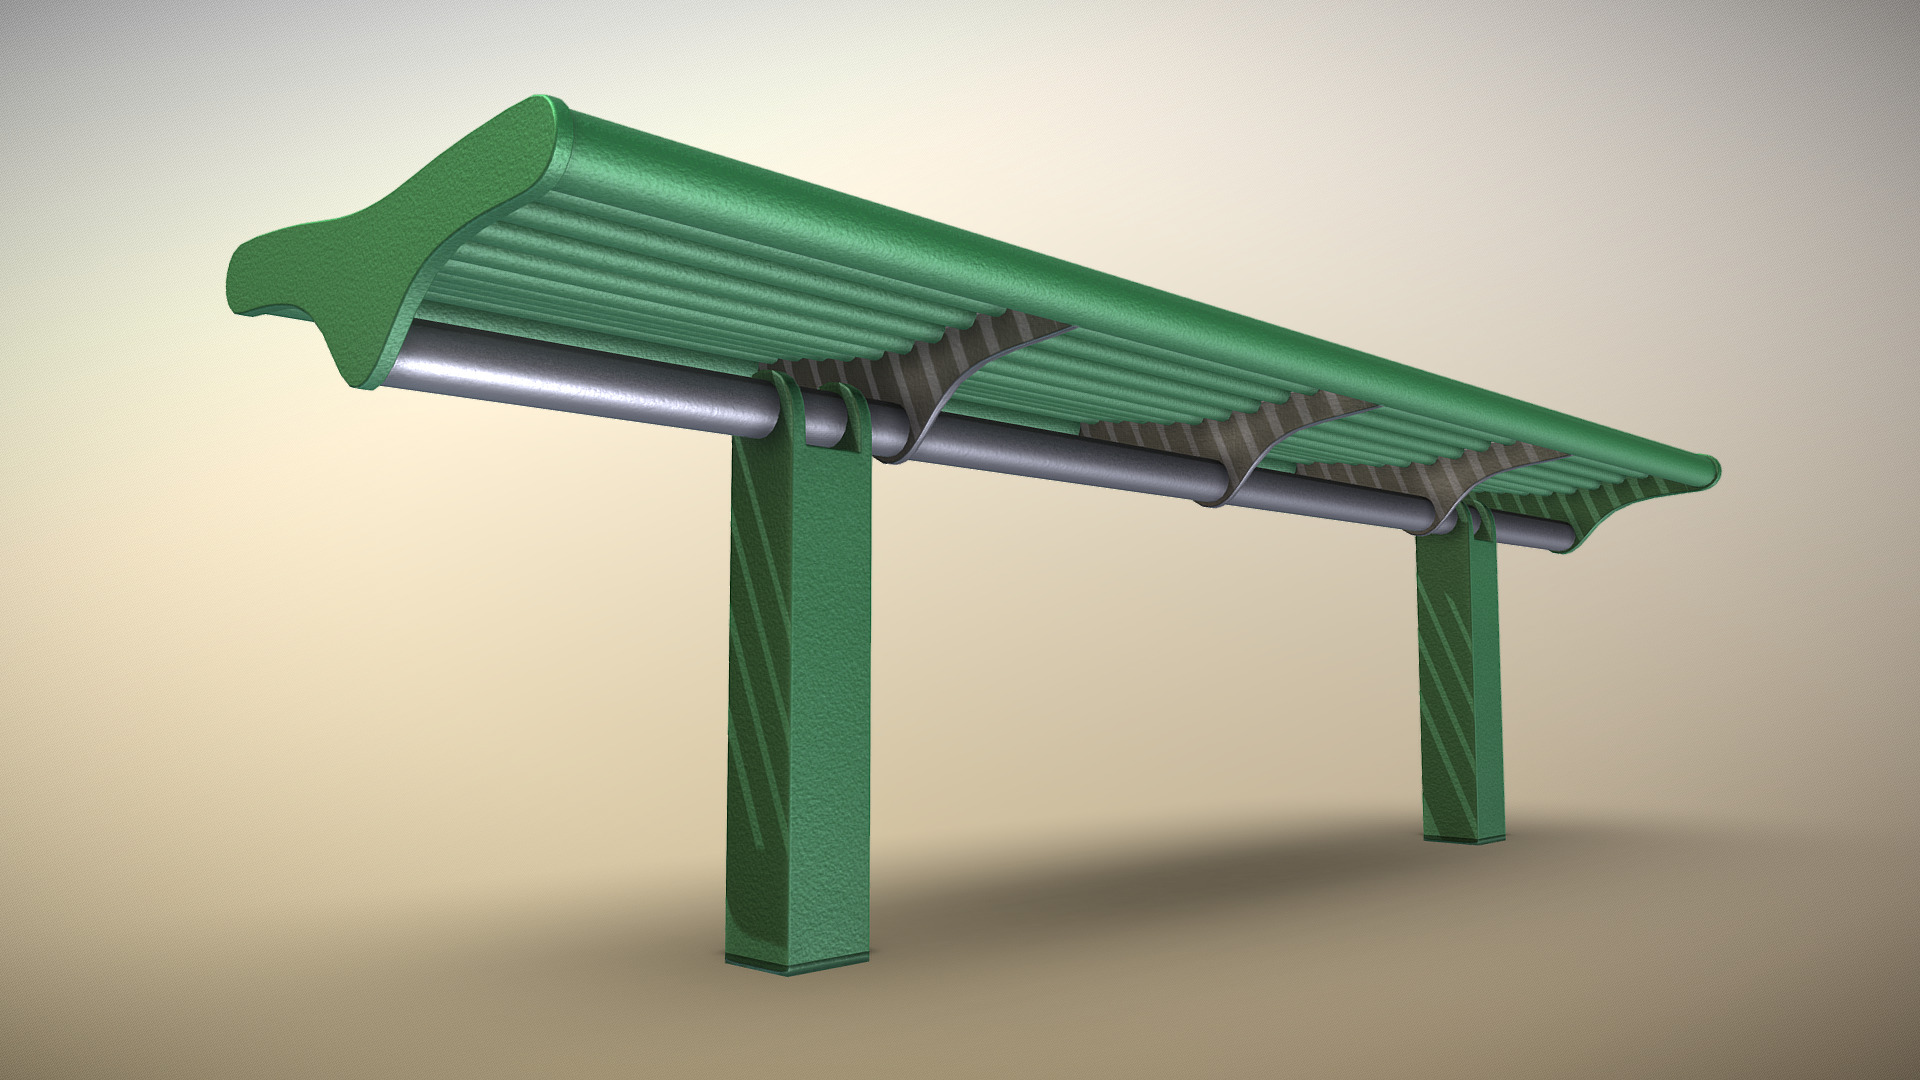 3D model Bench [5] (Low-Poly) (Green Painted Metal) - This is a 3D model of the Bench [5] (Low-Poly) (Green Painted Metal). The 3D model is about a green paper airplane.